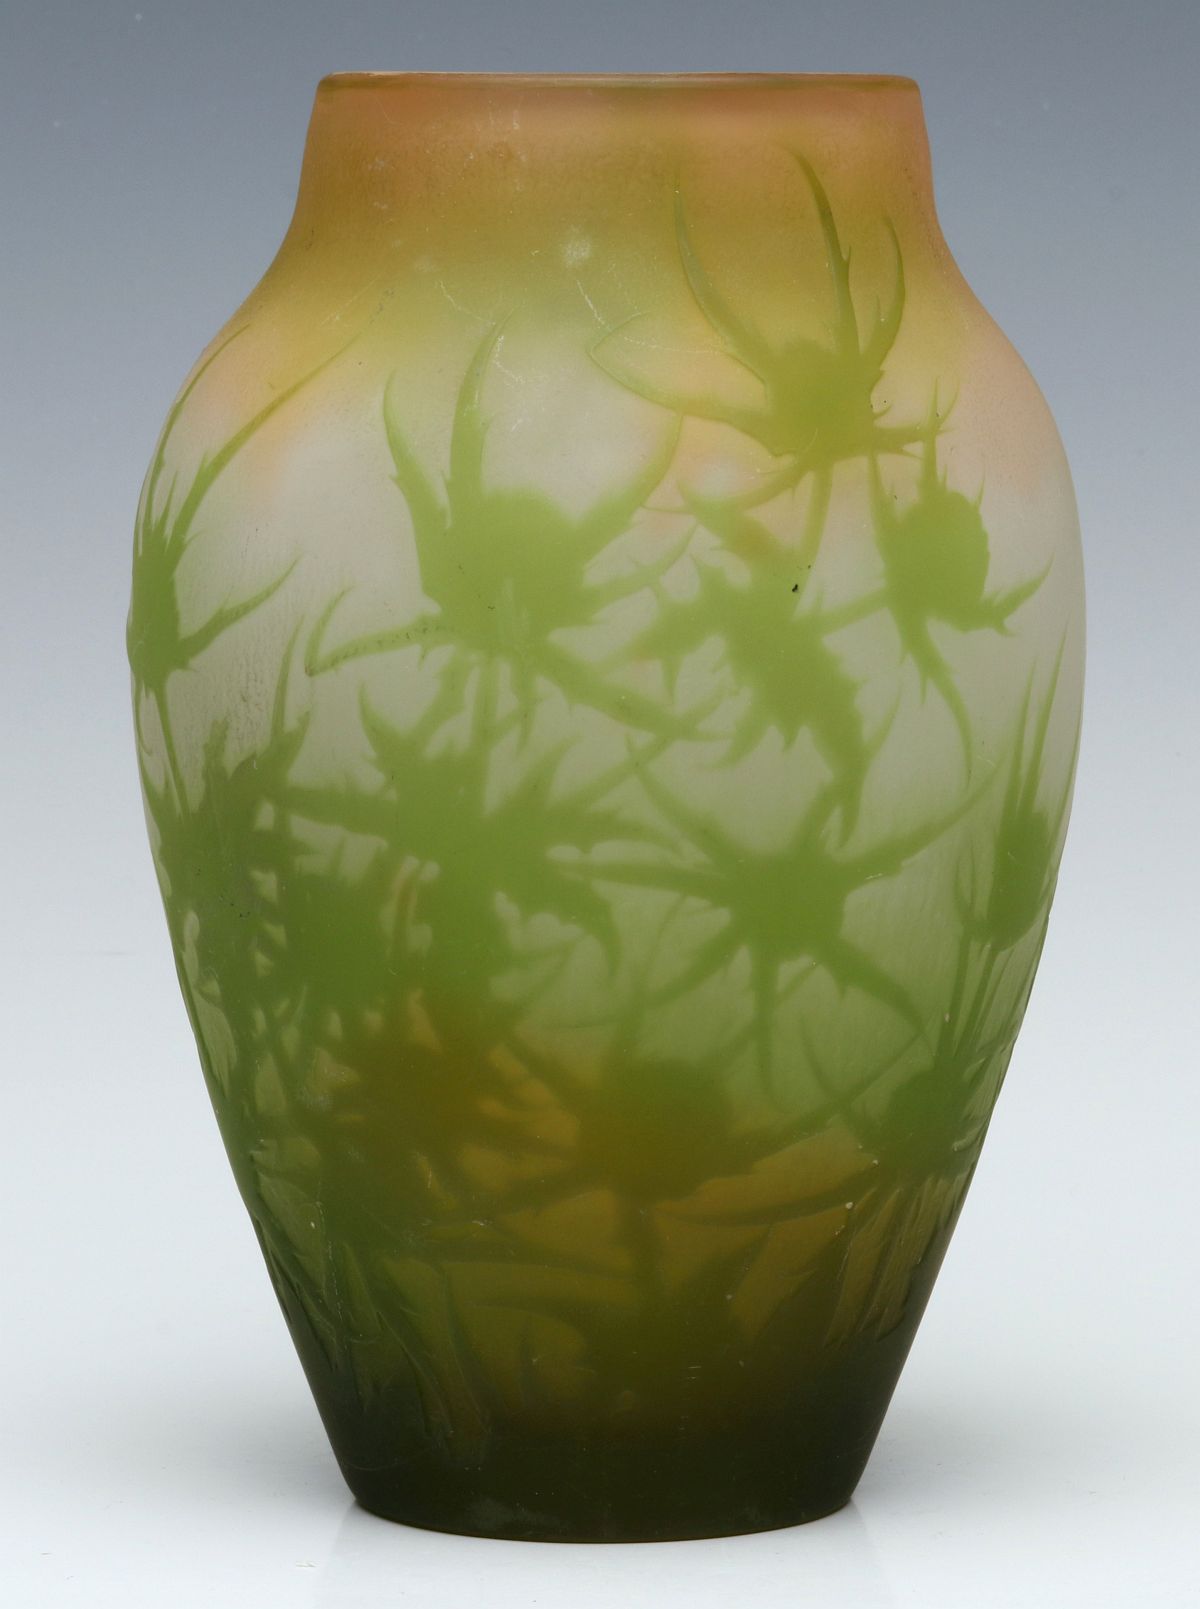 A FRENCH CAMEO GLASS VASE SIGNED GALLE'